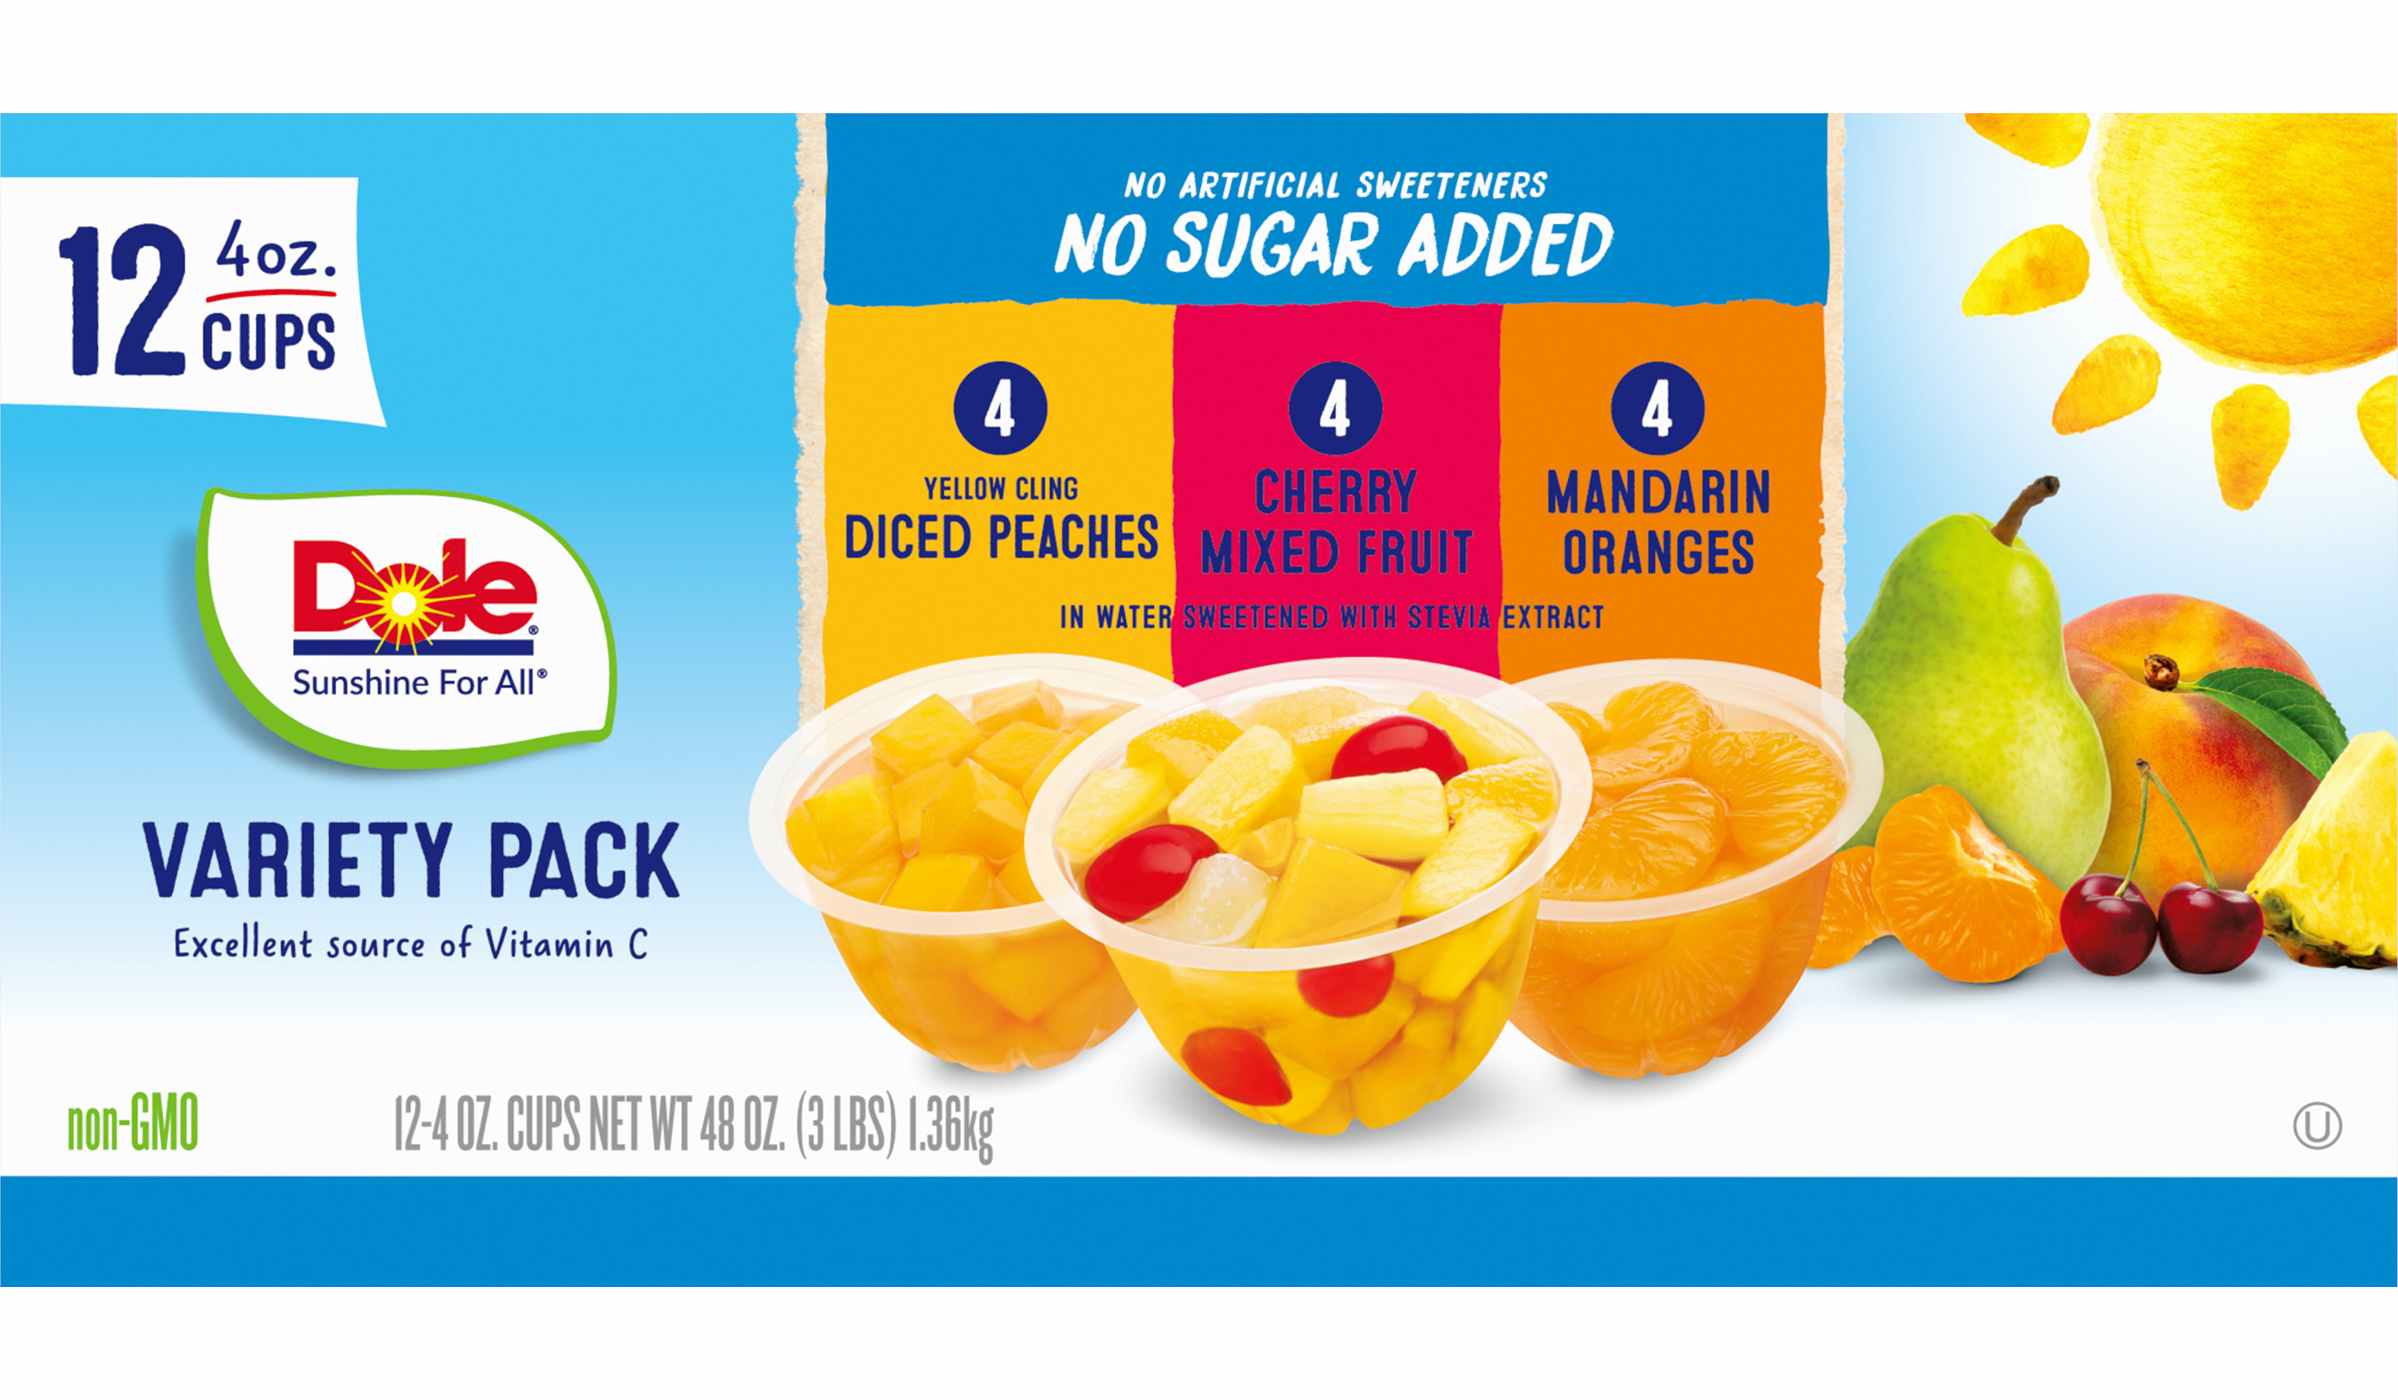 Dole Variety Pack - Peaches/ Cherry Mixed Fruit/Oranges; image 2 of 4